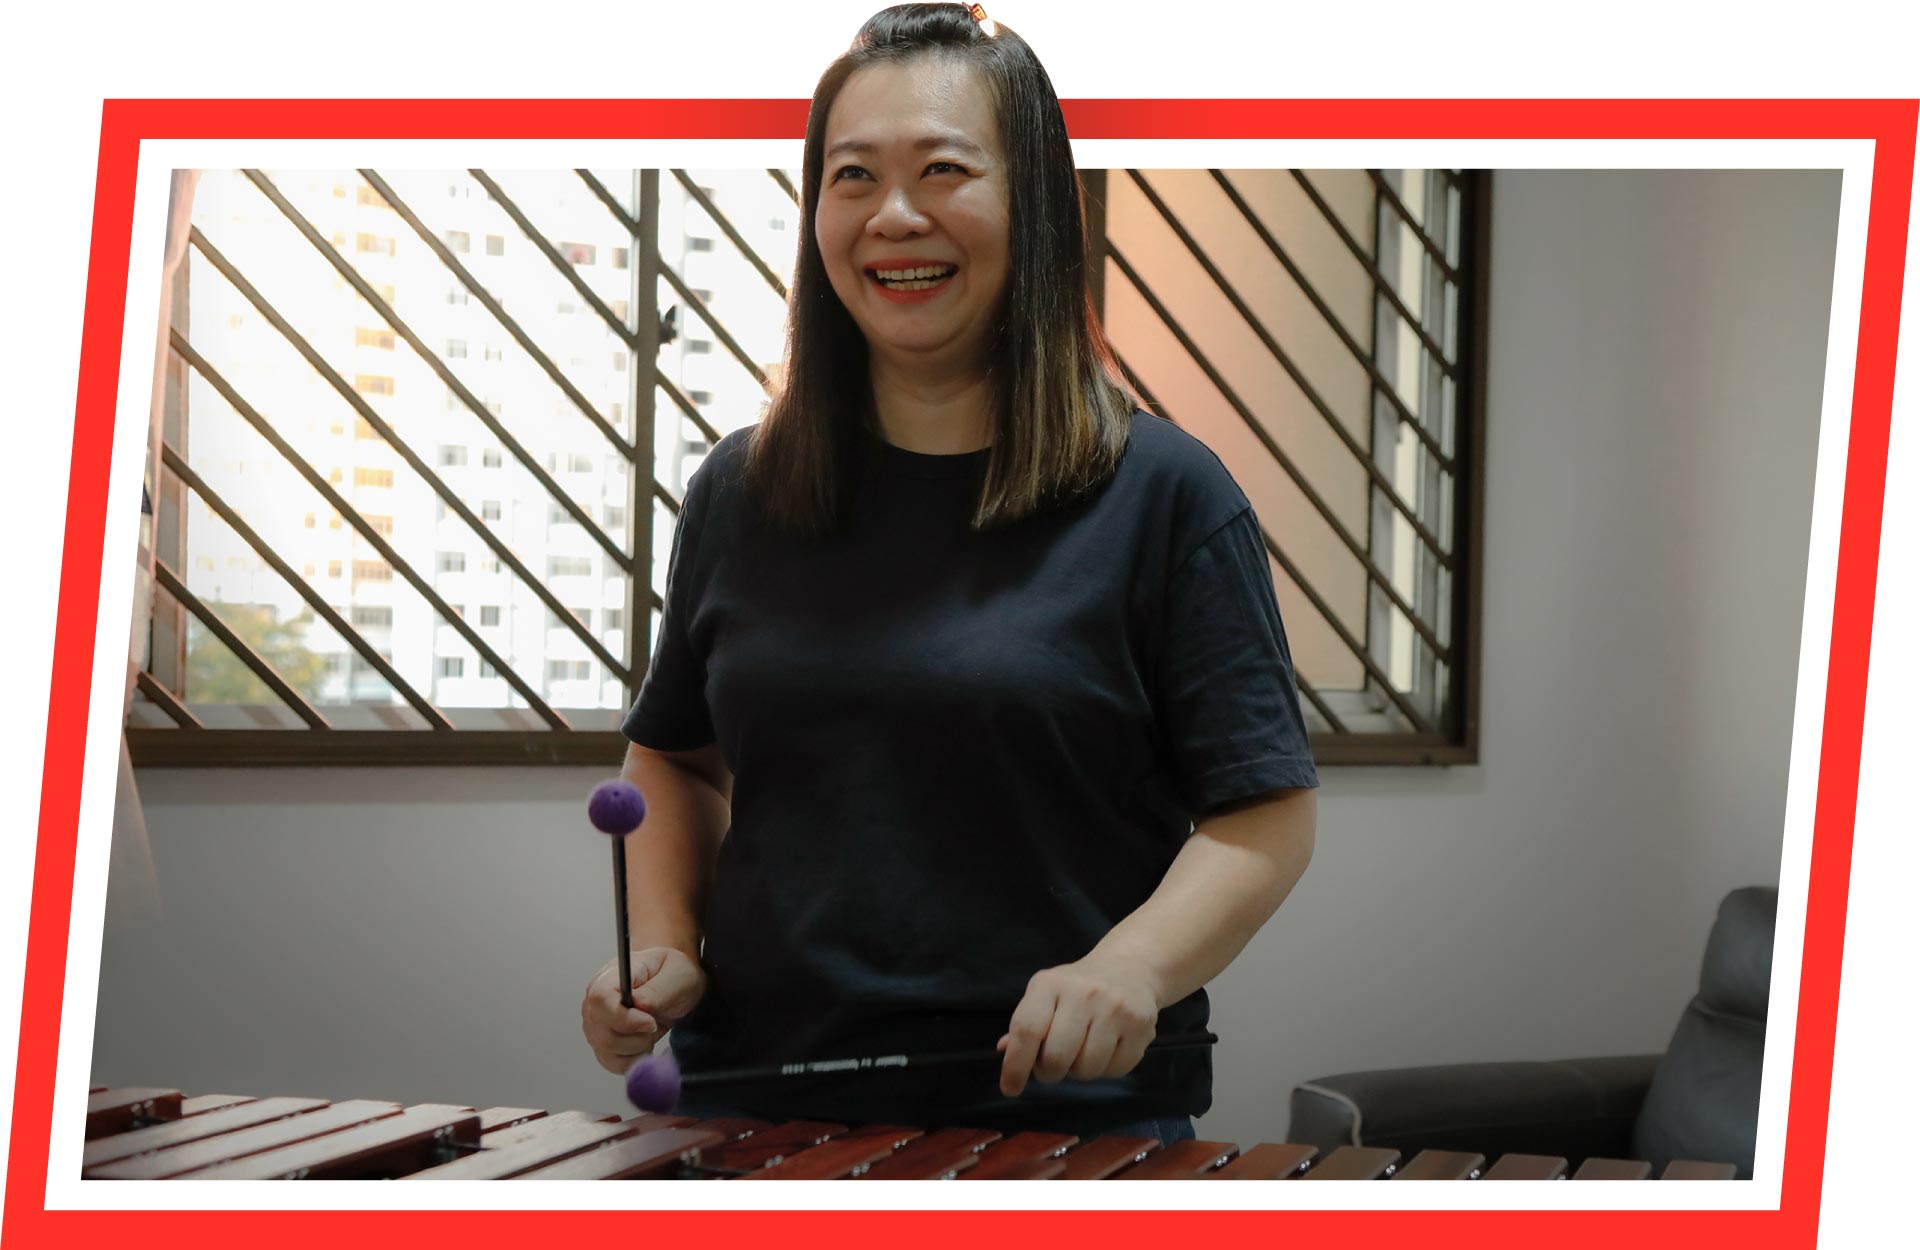 Lily Goh playing the xylophone